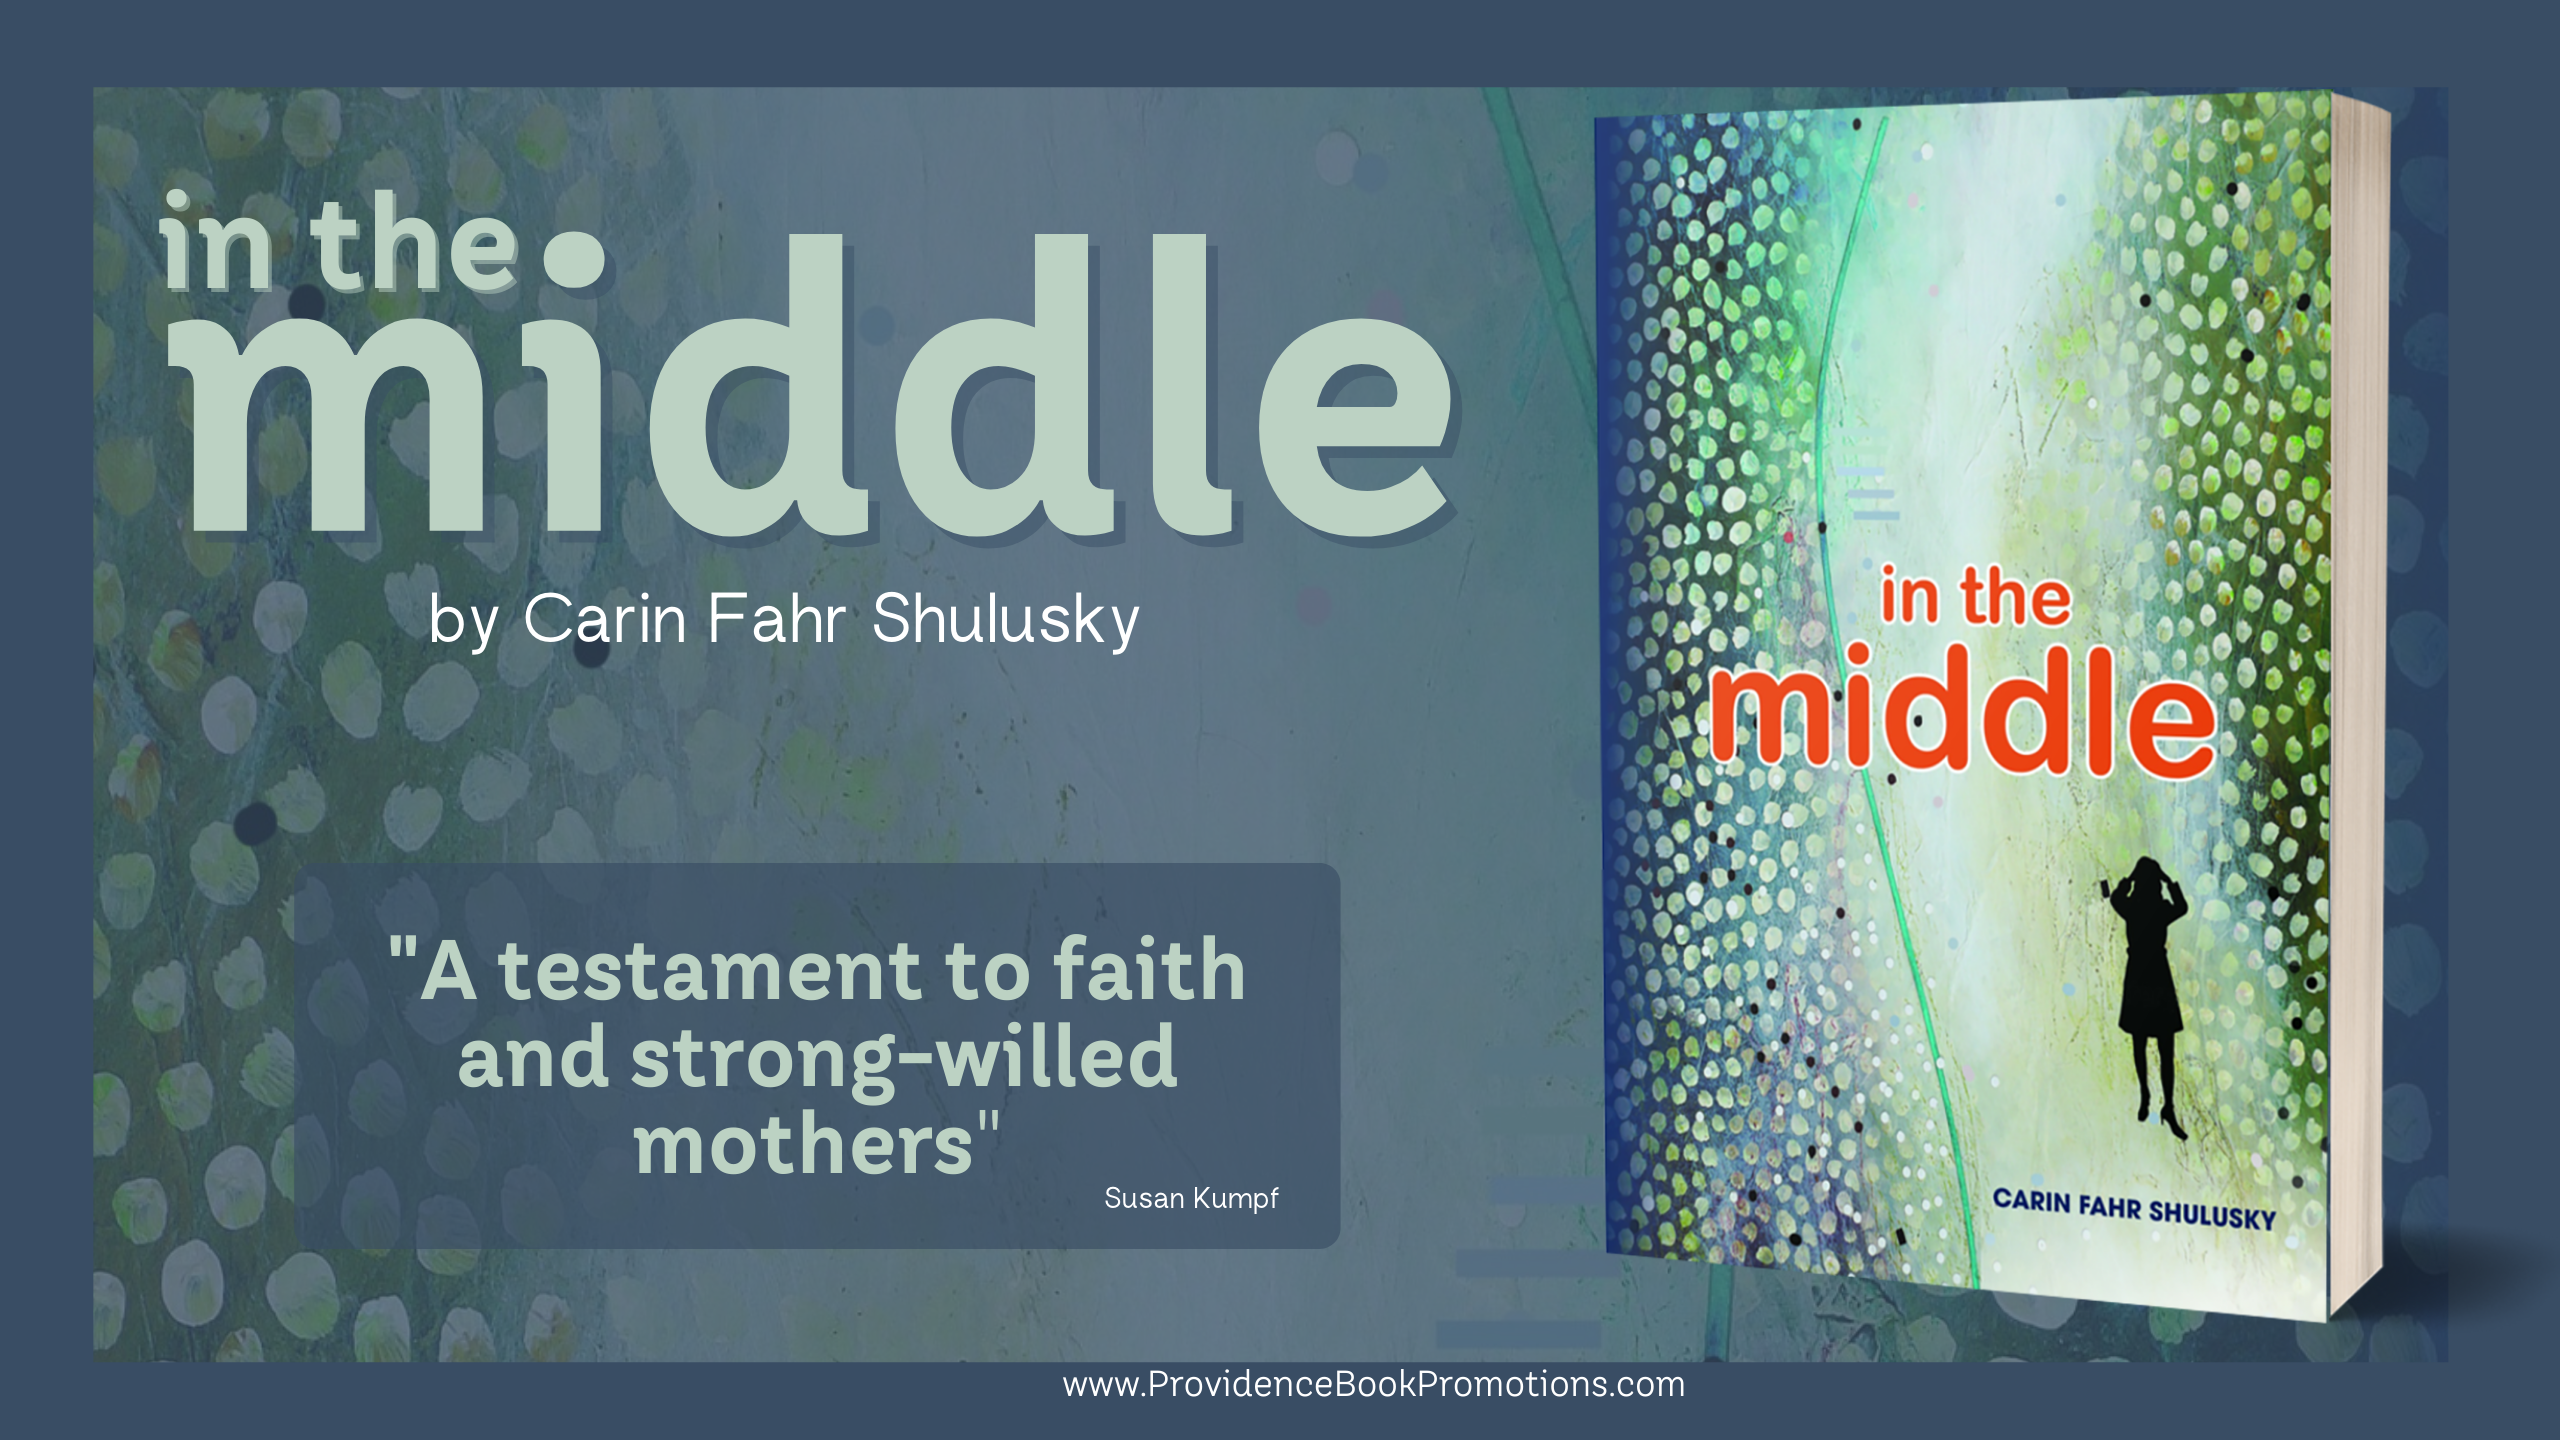 BookBlast: In the Middle by Carin Fahr Shulusky